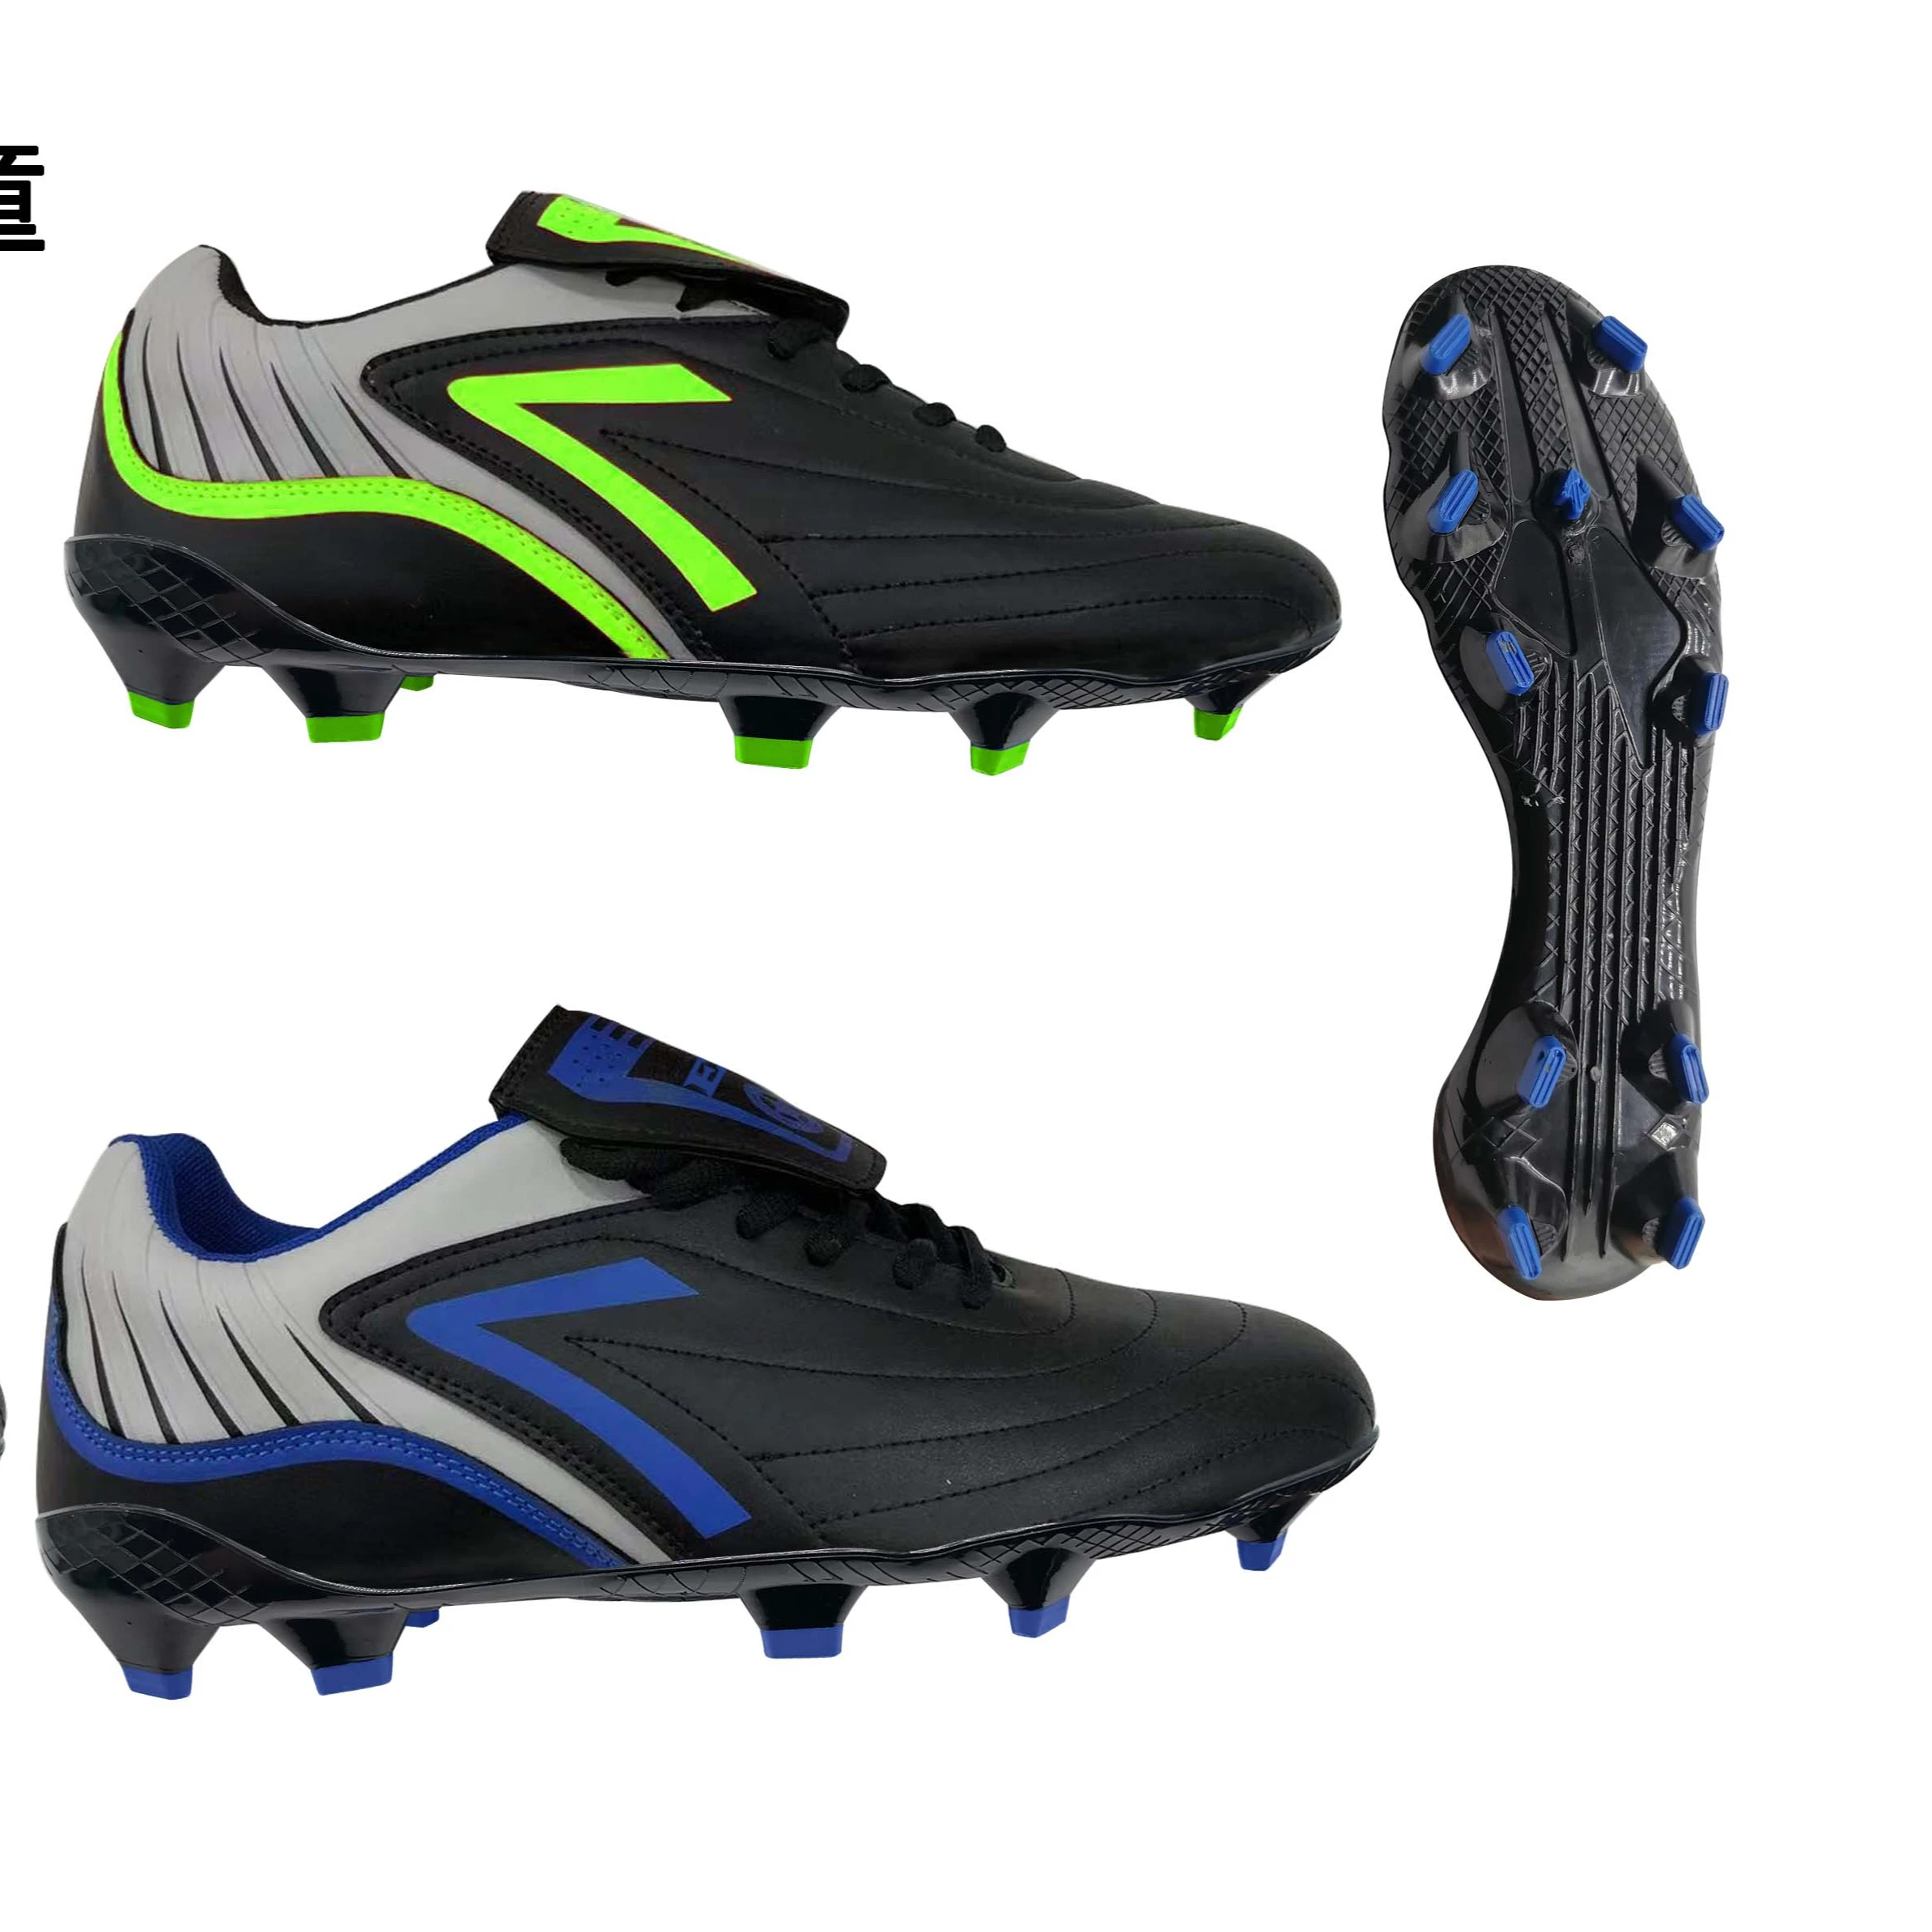 Hot-selling Factory Competitive Custom Football Boots Spike Training Shoes Top Quality Football Boots Athletic Shoes Soccer